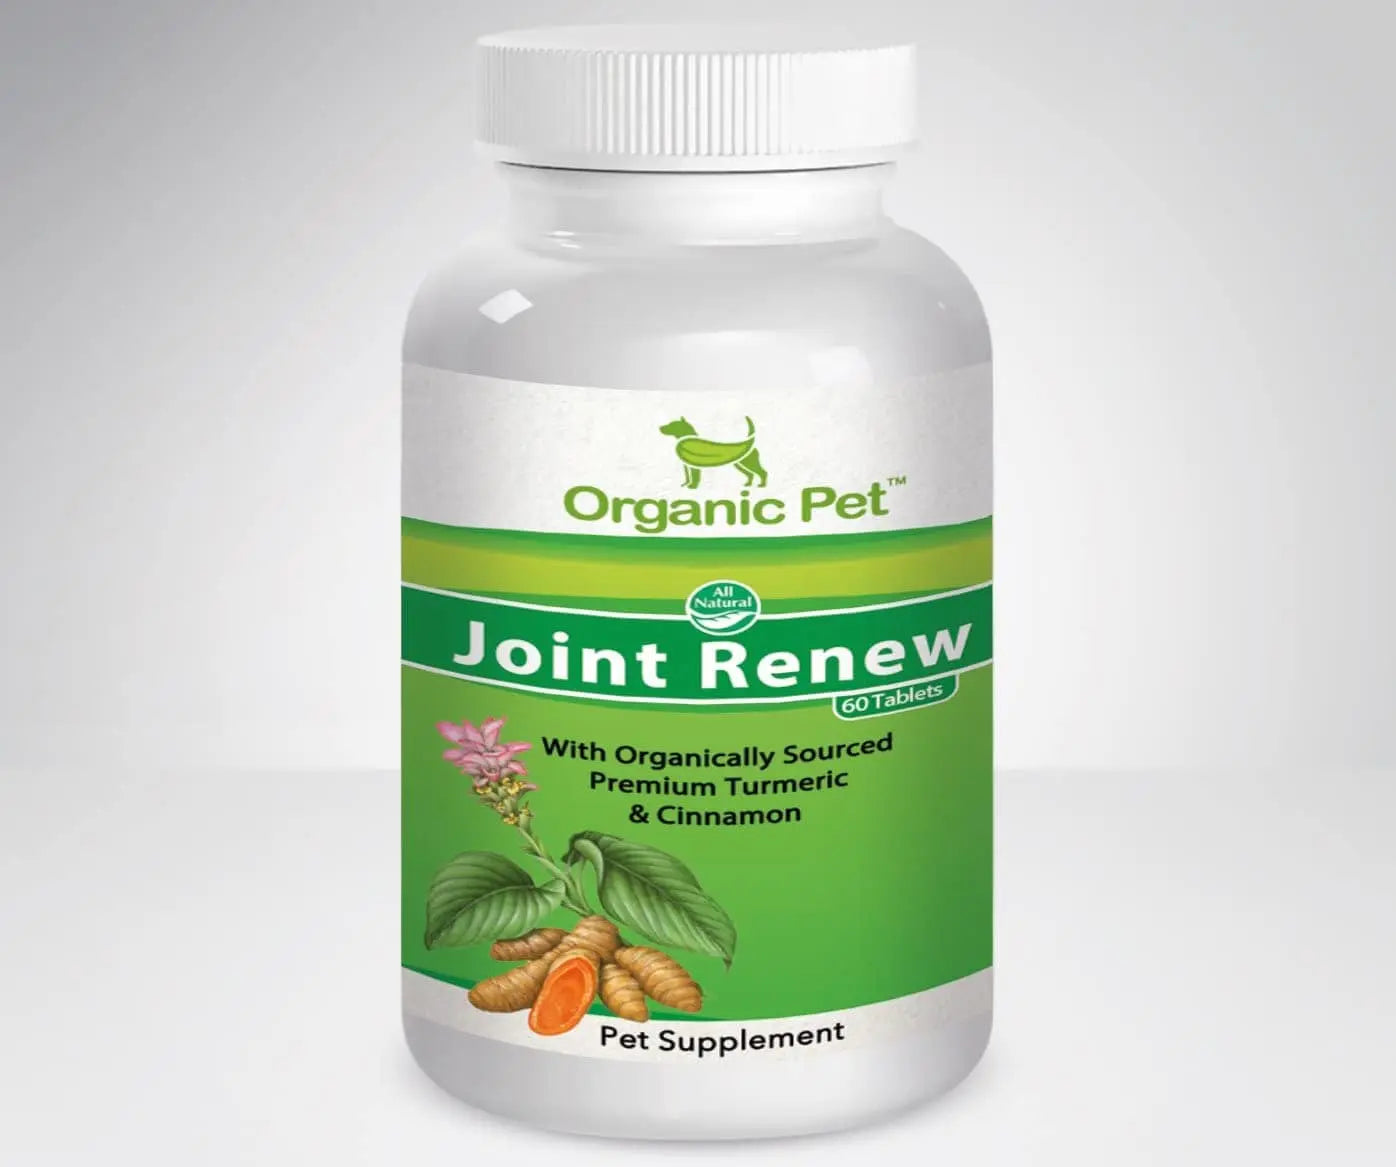 Success Chemistry Organic Pet Supplement For Dogs & Cats - Joint Renew Joint Health